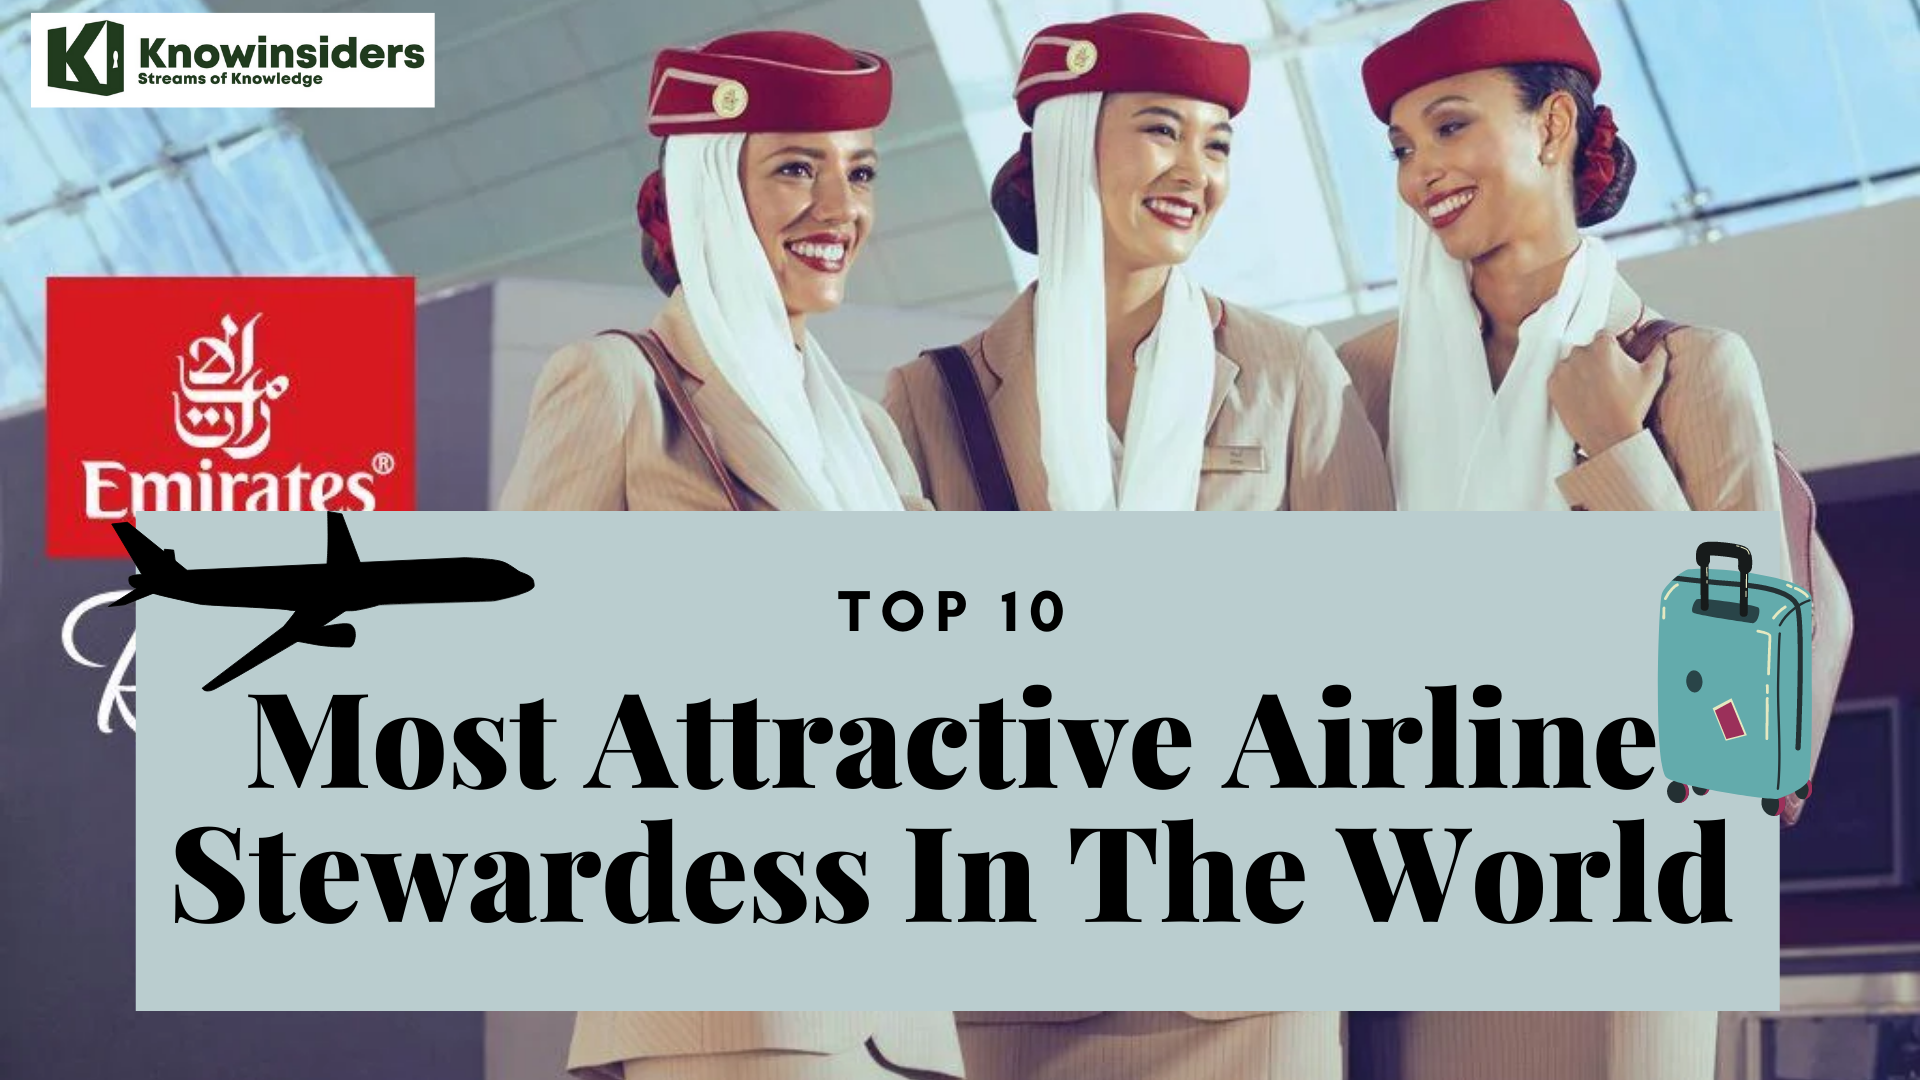 Top 10 Most Attractive Stewardess in The World